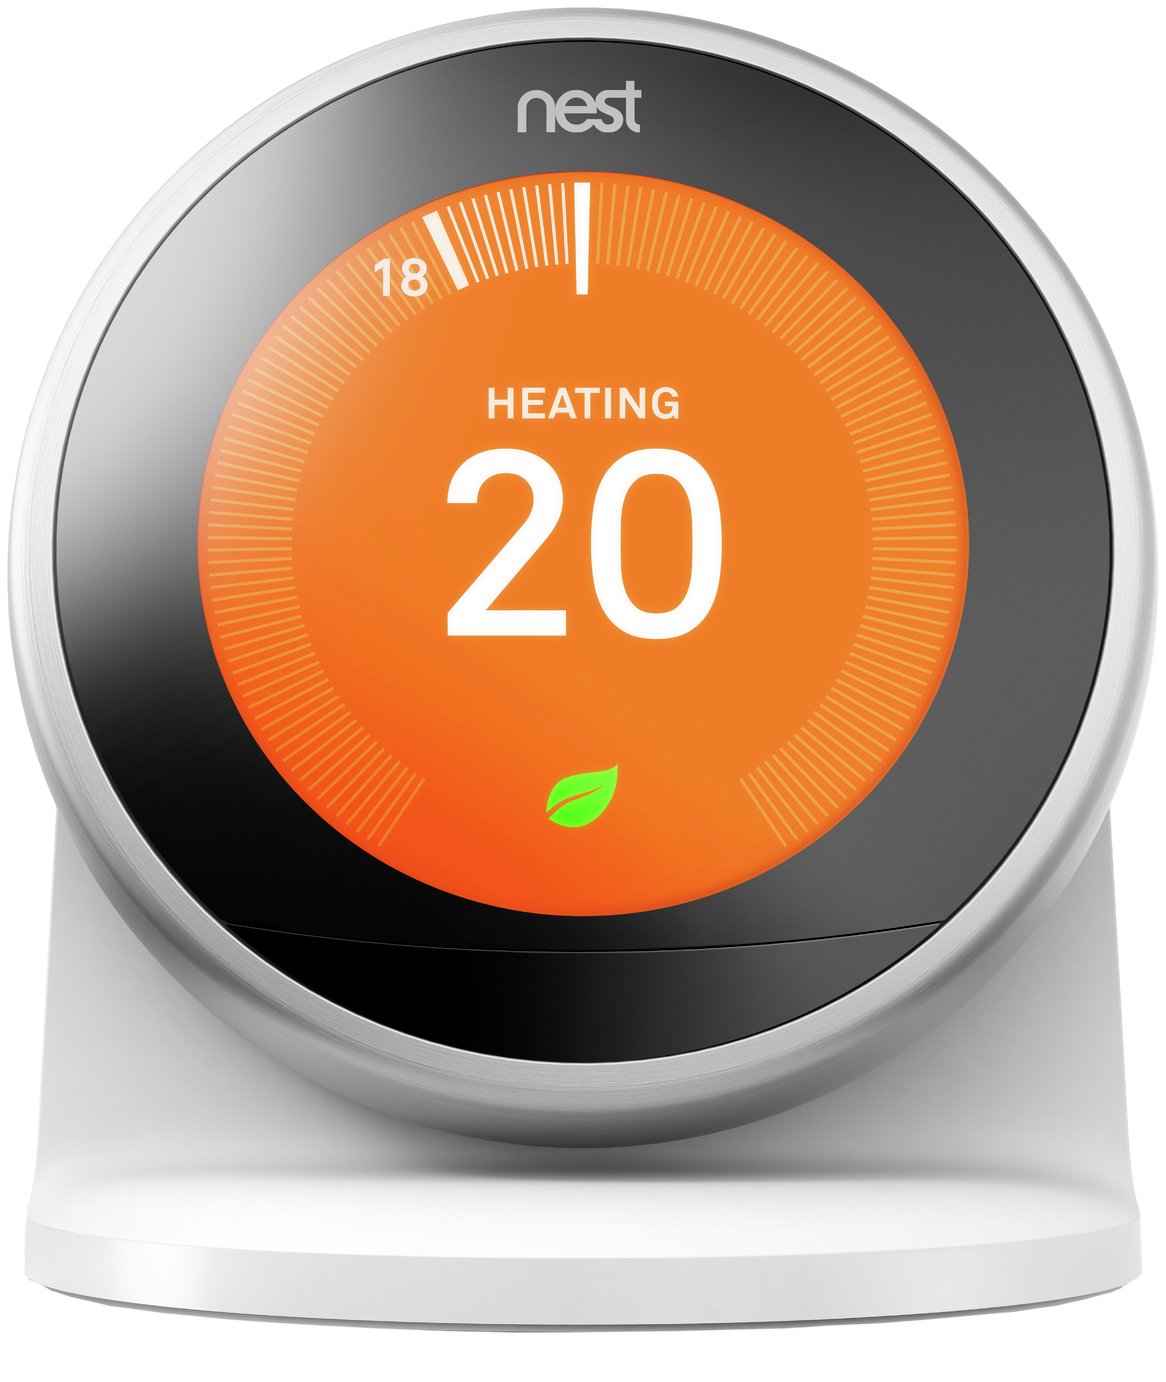 Google Nest Stand for 3rd Generation Learning Thermostat Review